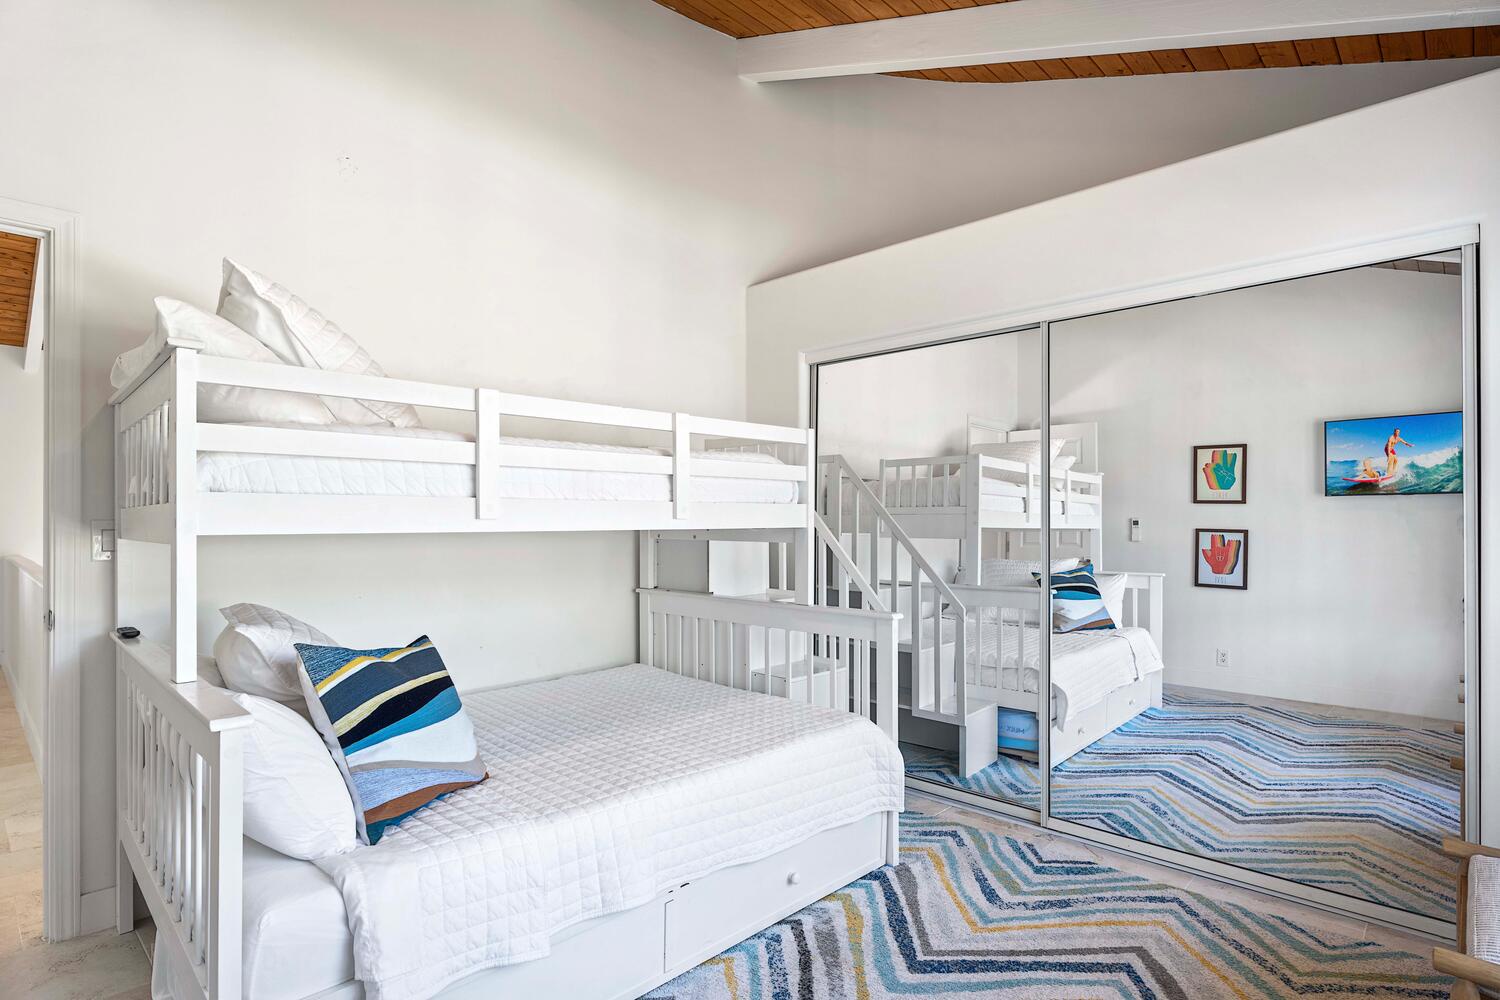 Kailua Kona Vacation Rentals, Ho'okipa Hale - Third suite is perfect for the little ones: nice, comfy and colorful!